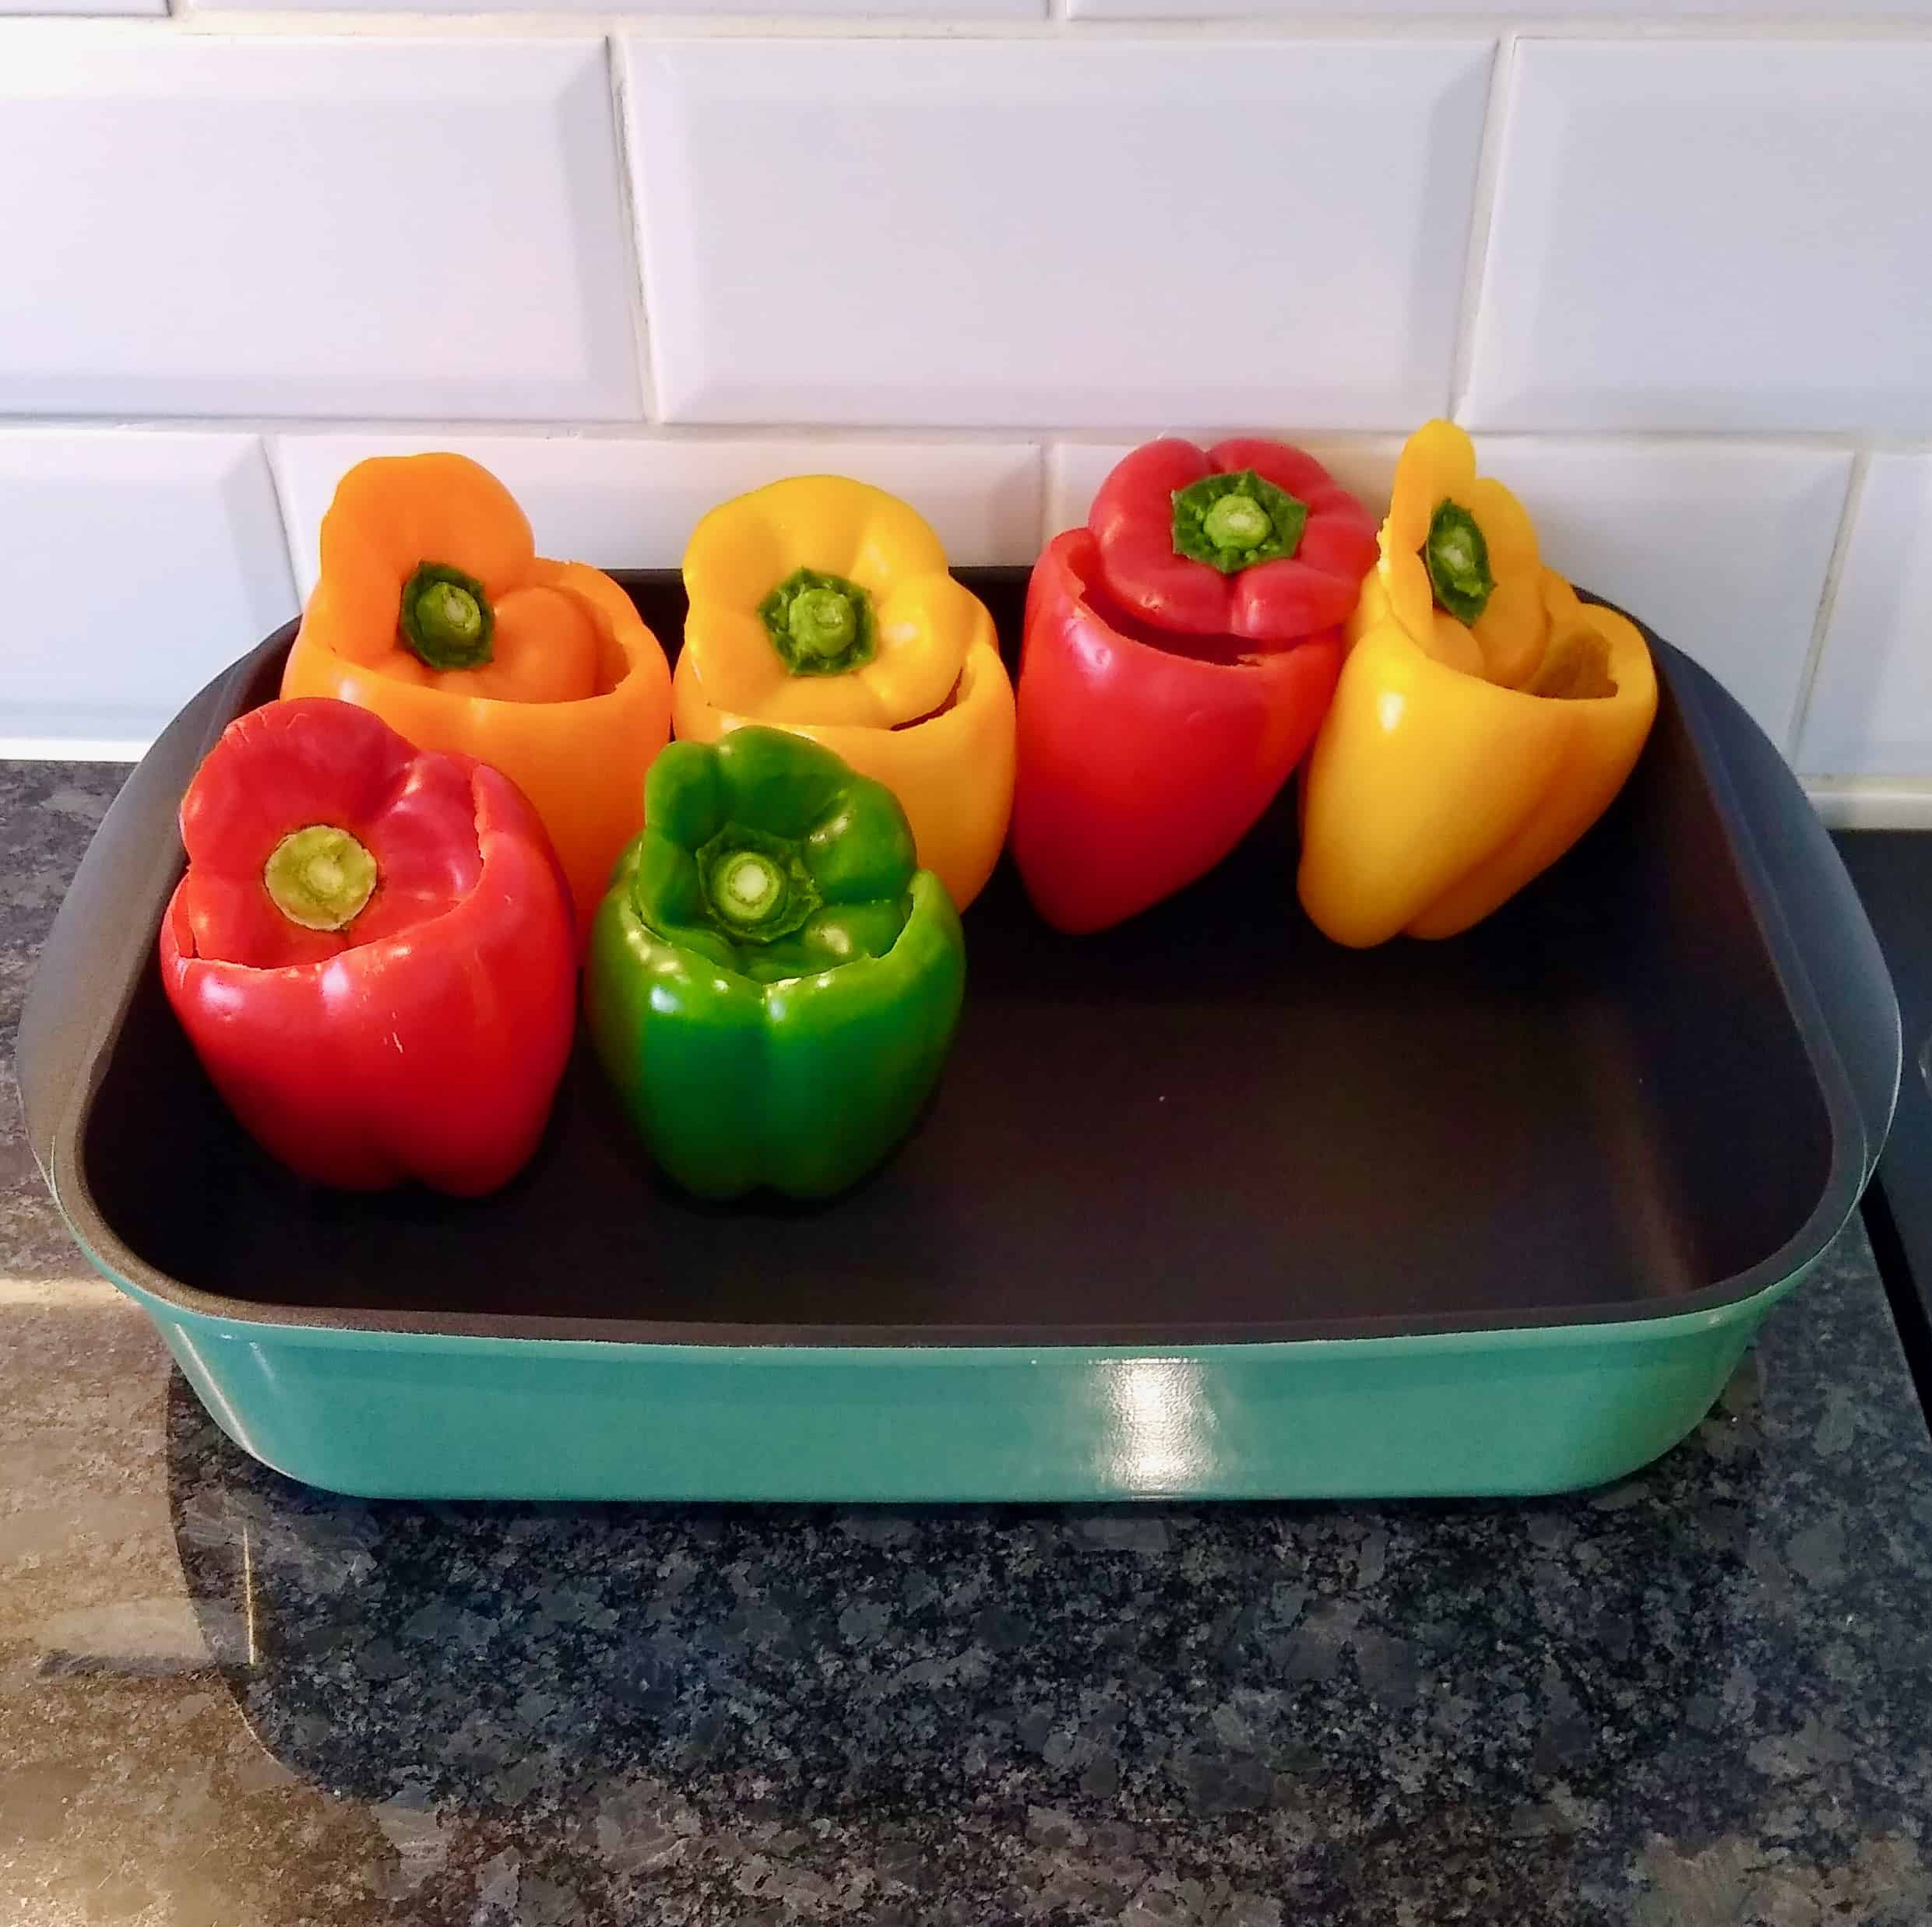 Greek Gemista (Oven Baked or Steamed Stuffed Vegetables with Rice and Mince Meat ) Peppers ready to stuff